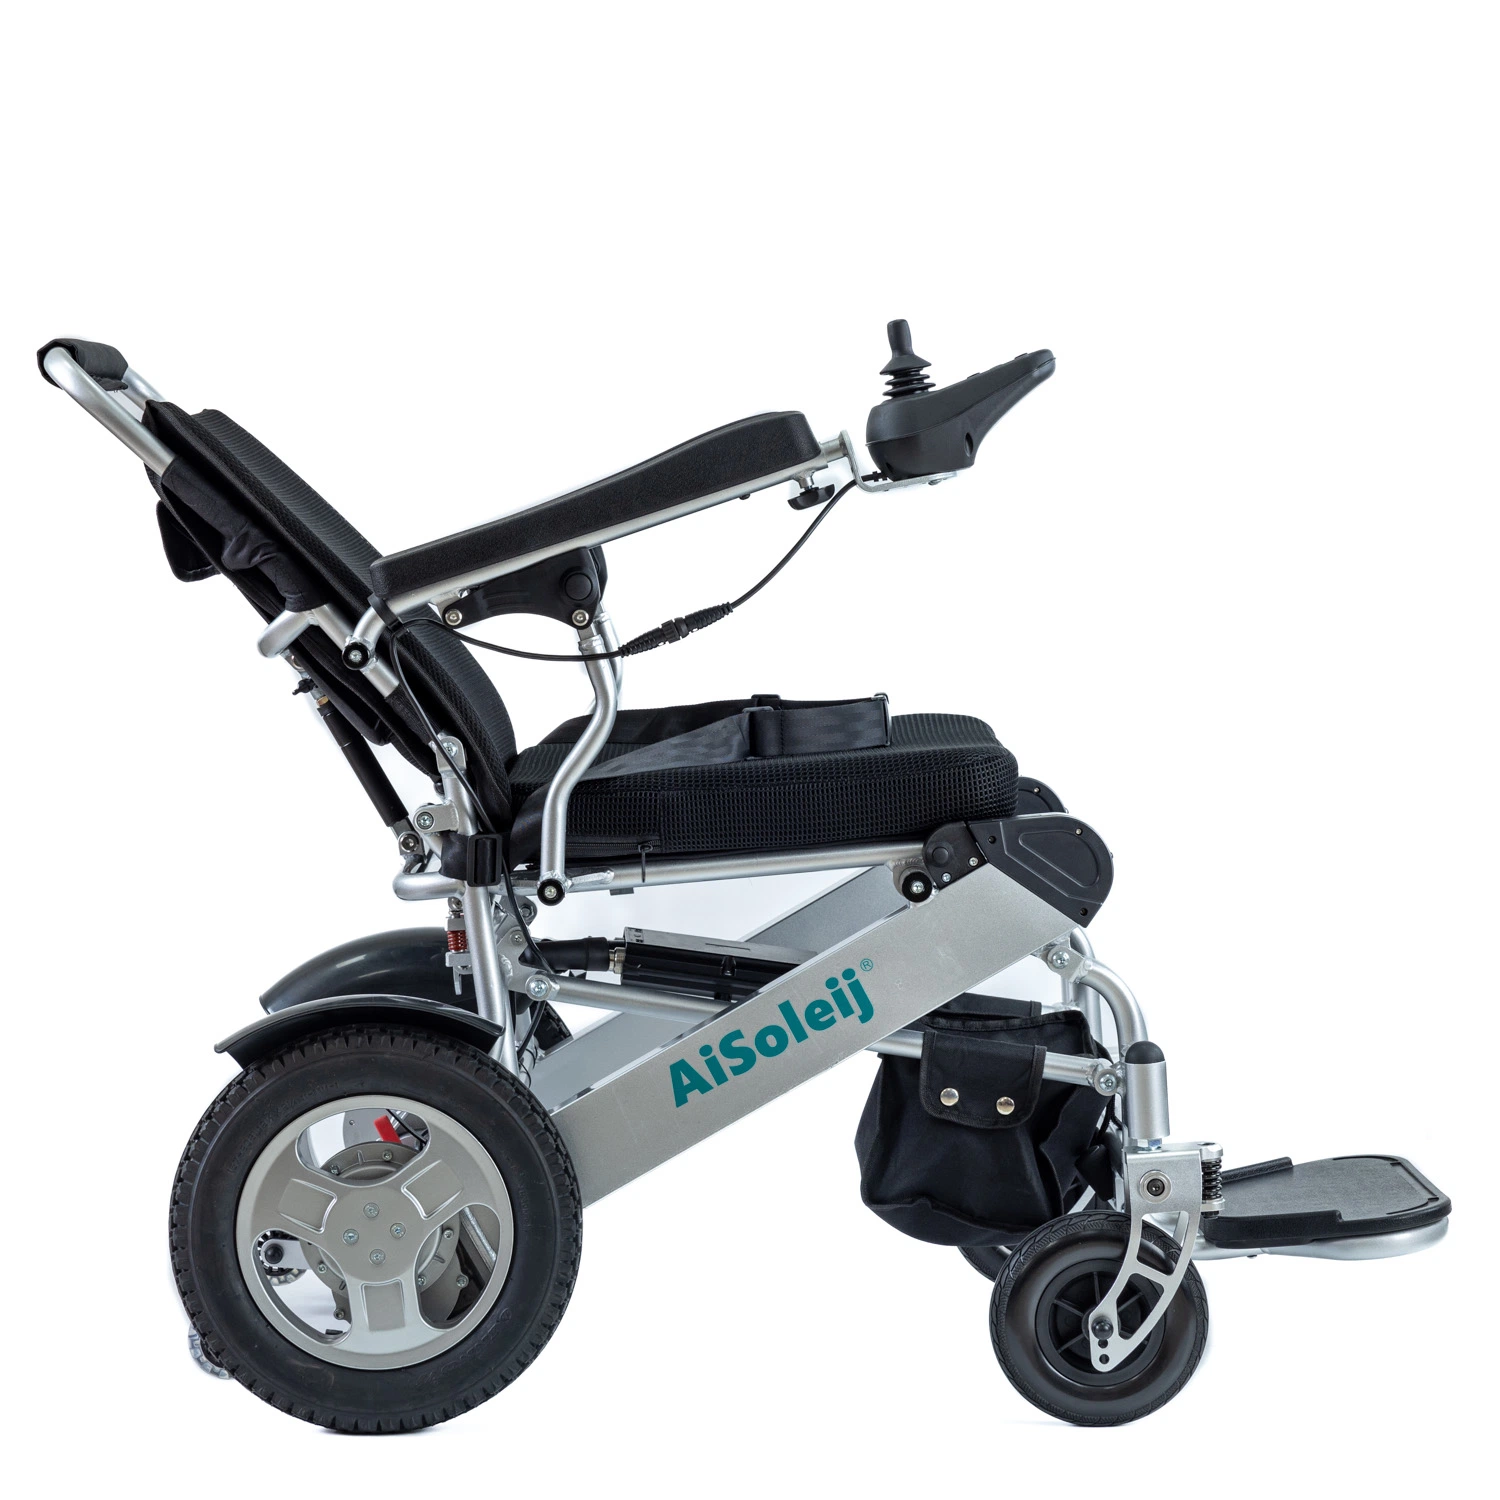 250W Brushless Motor Folding Portable Electric Wheelchair with Recline Back